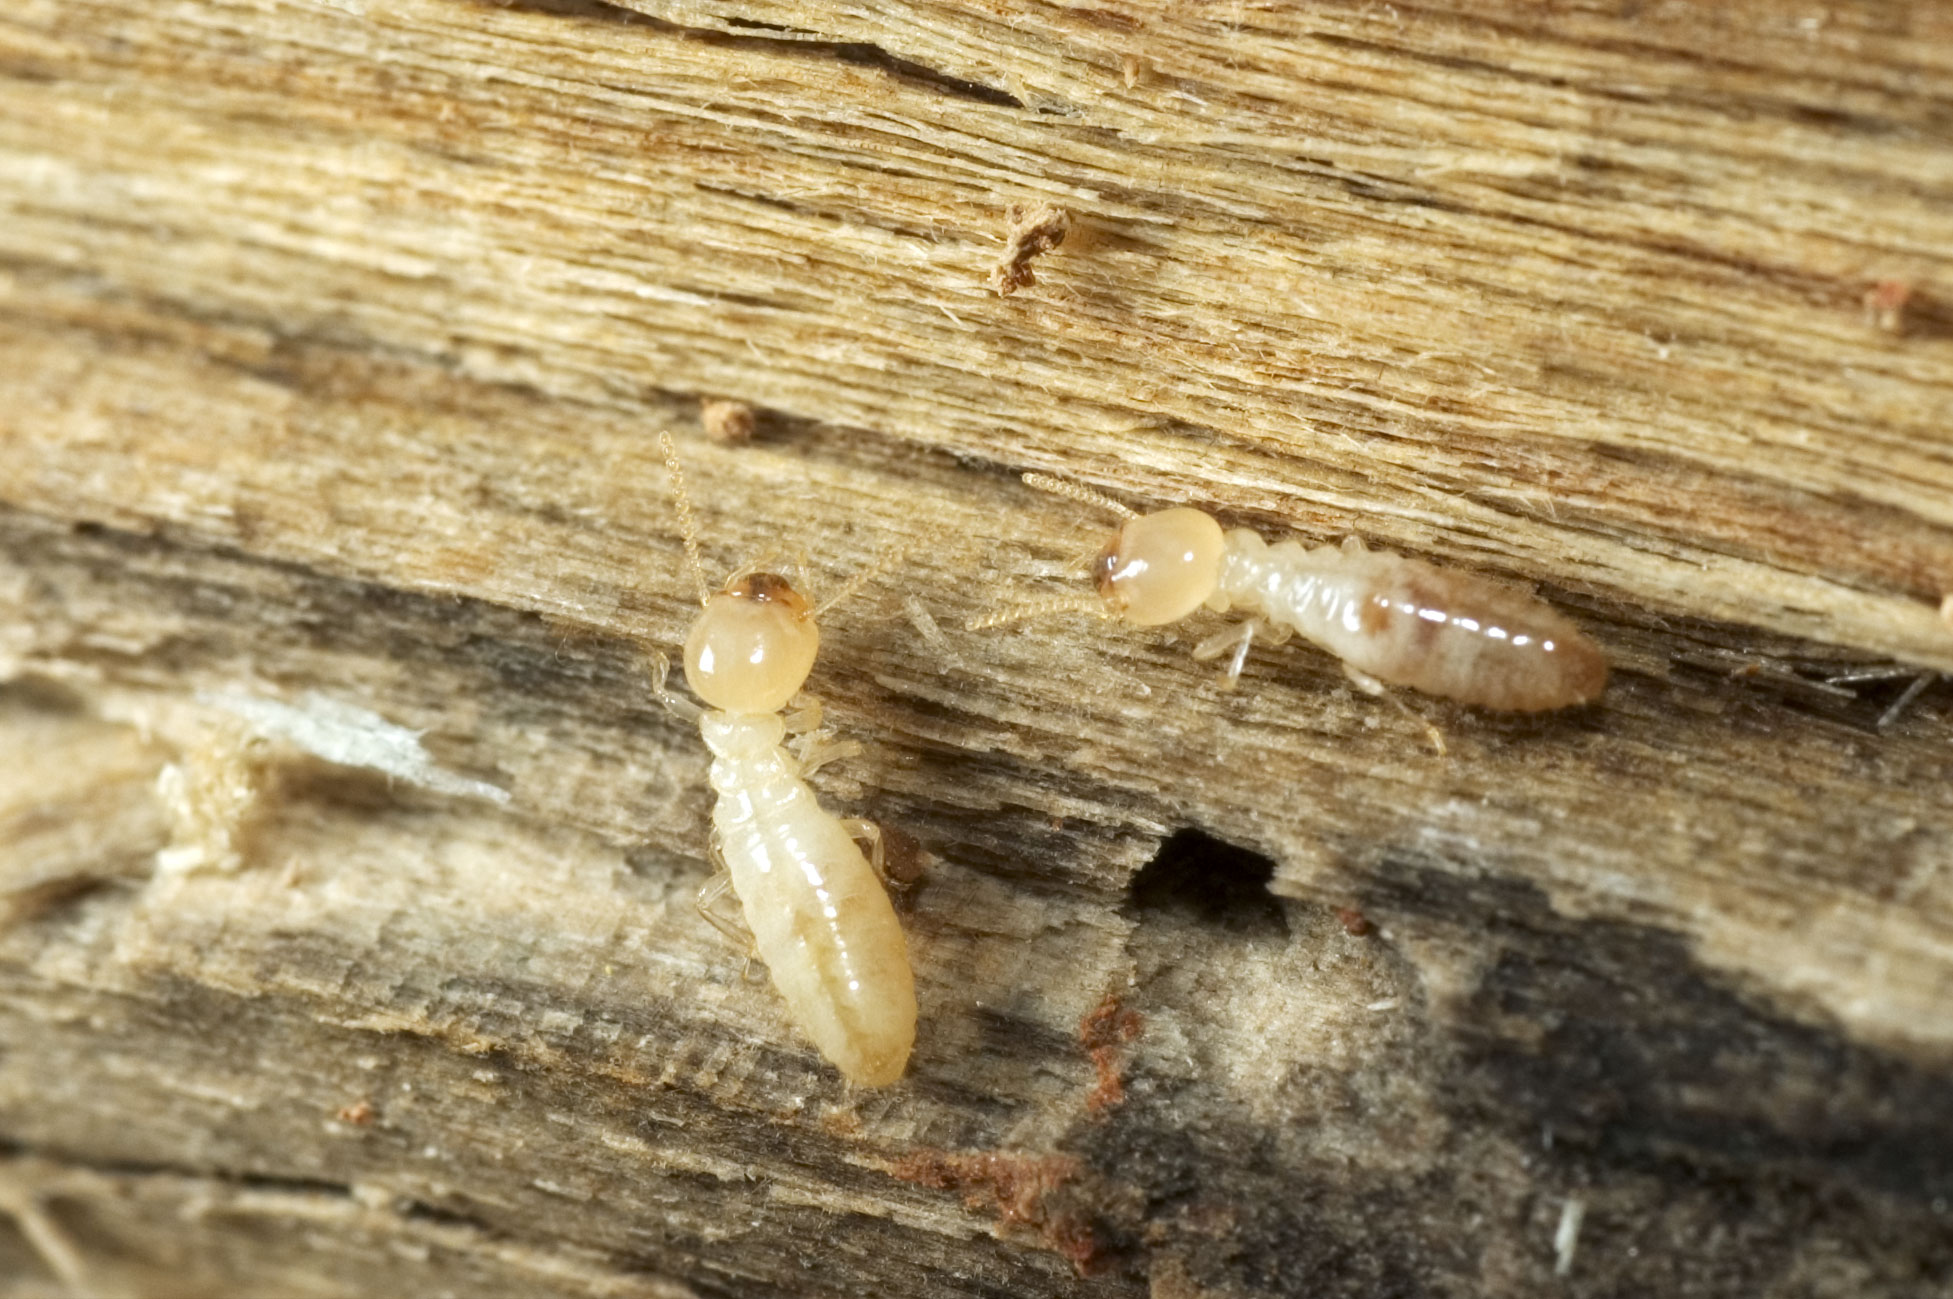 termites eat wood because of what's in their stomach